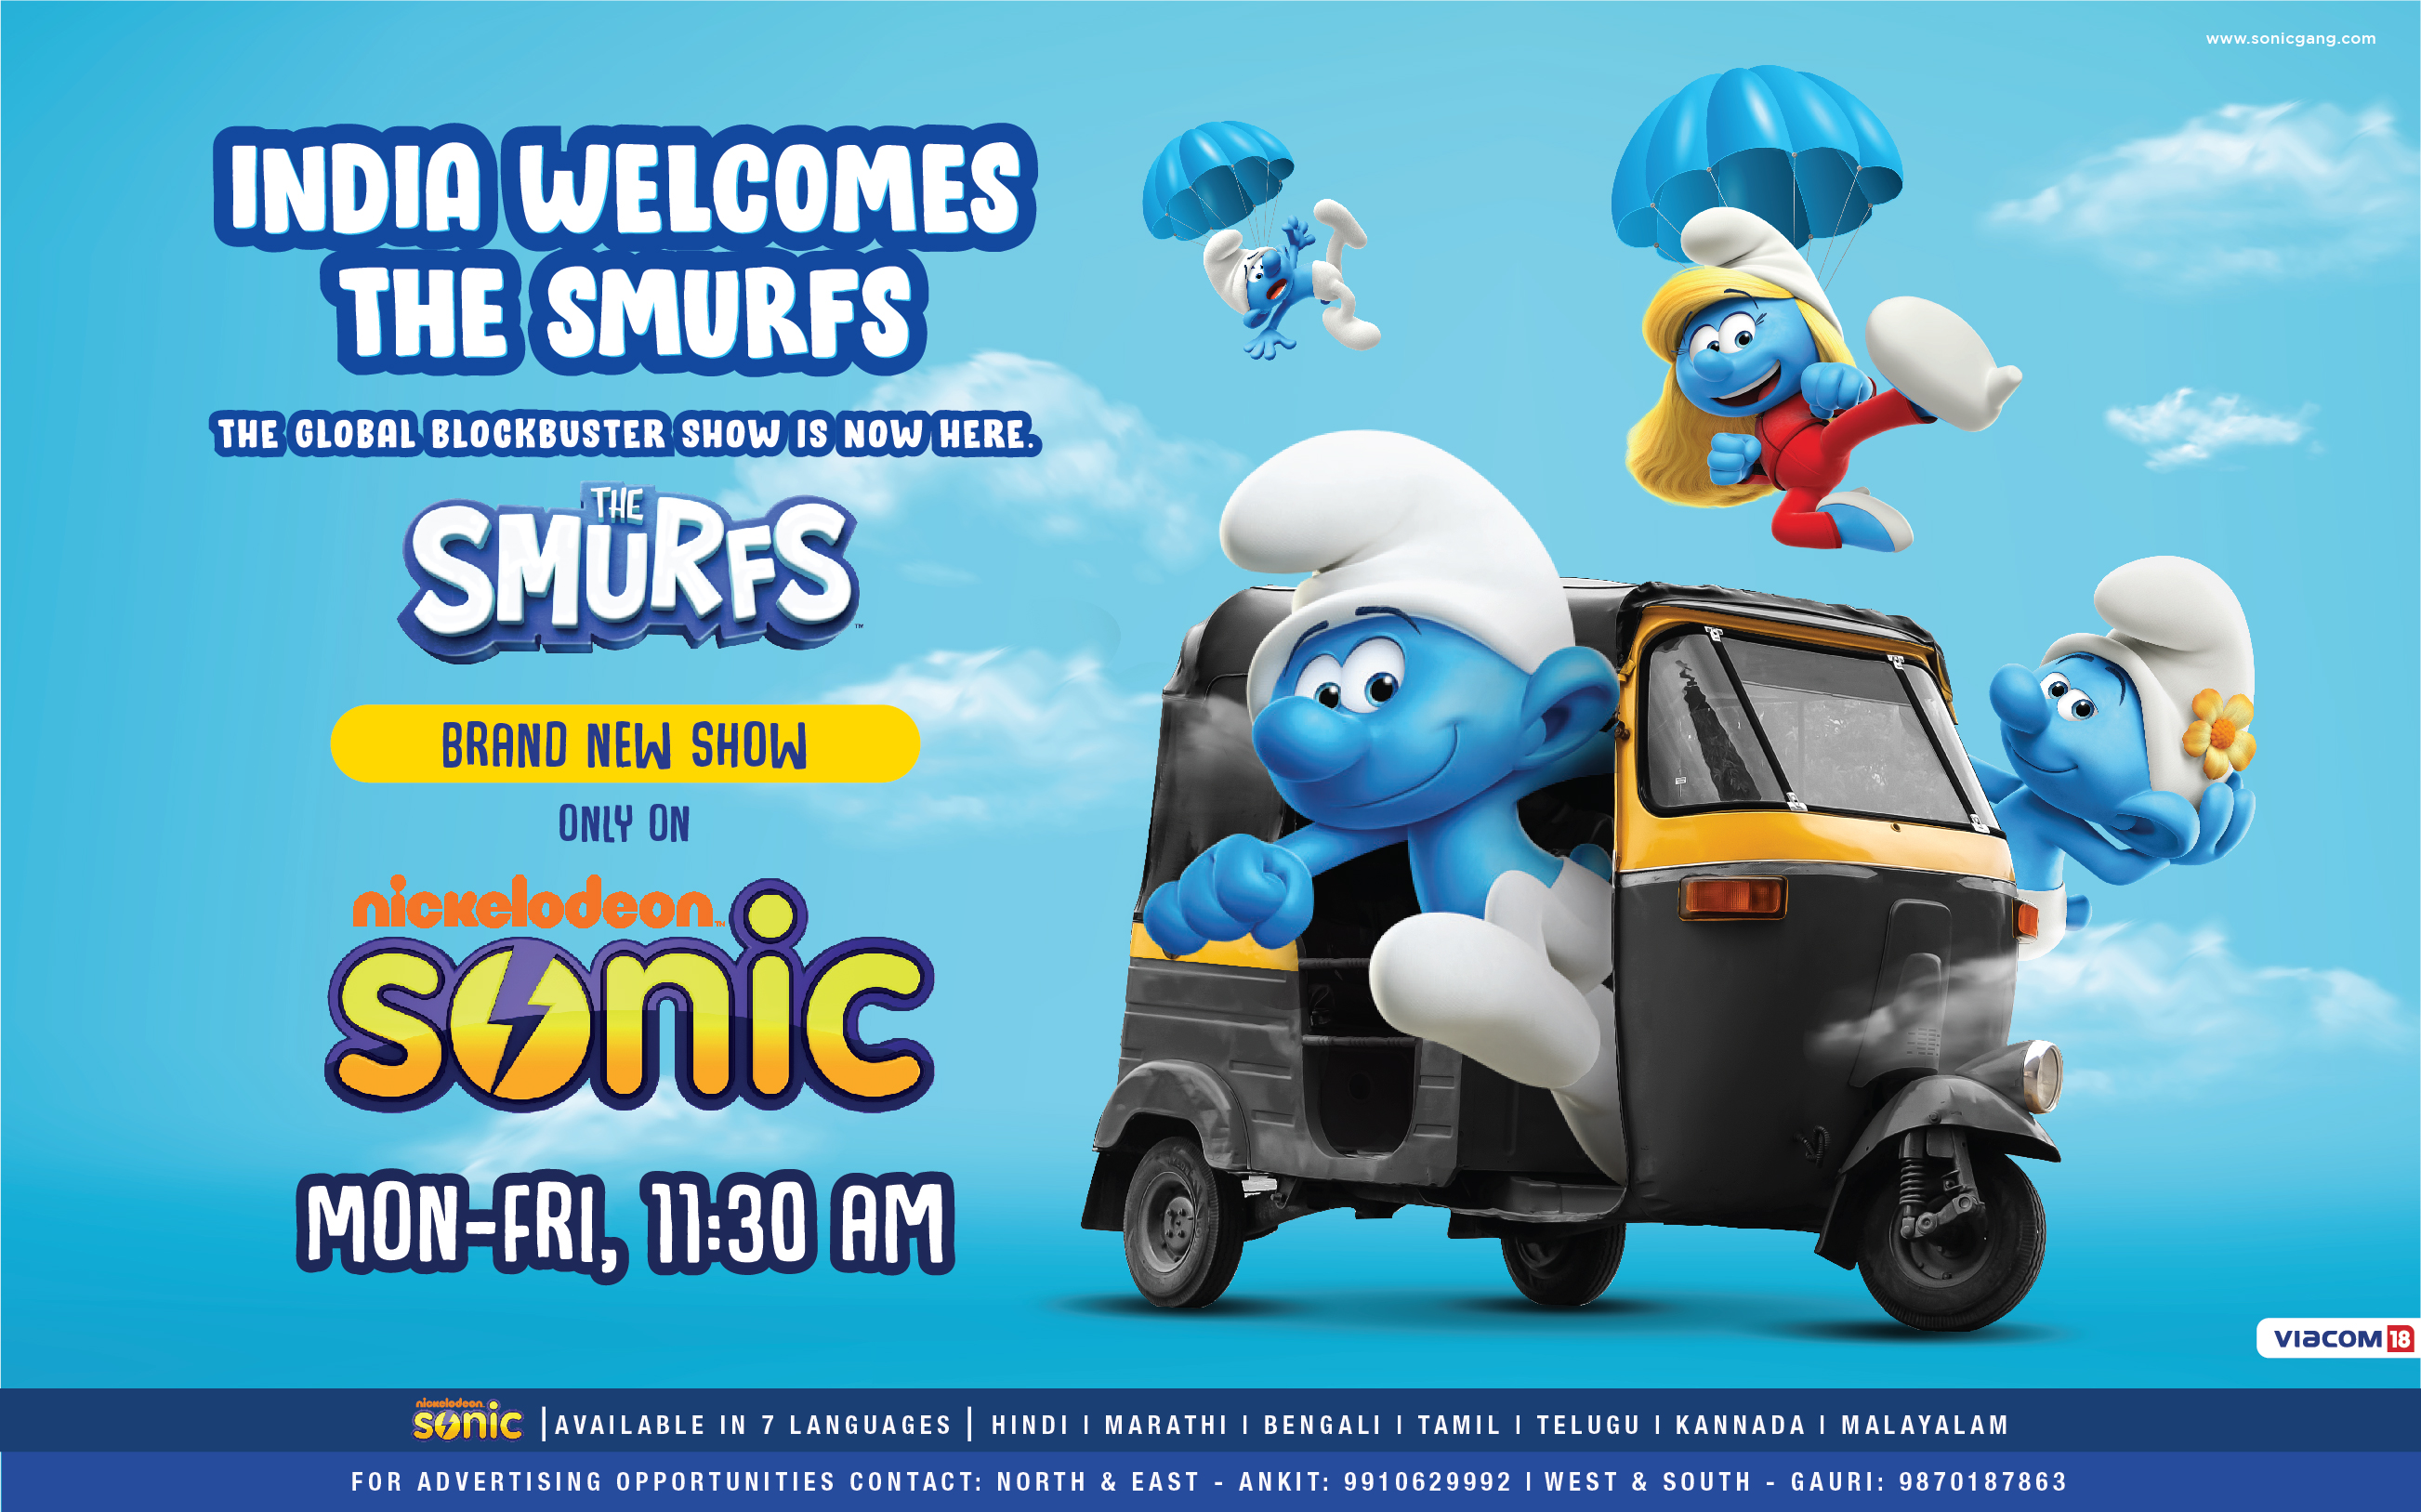 NickALive!: Nickelodeon Sonic India Premieres 'The Smurfs'